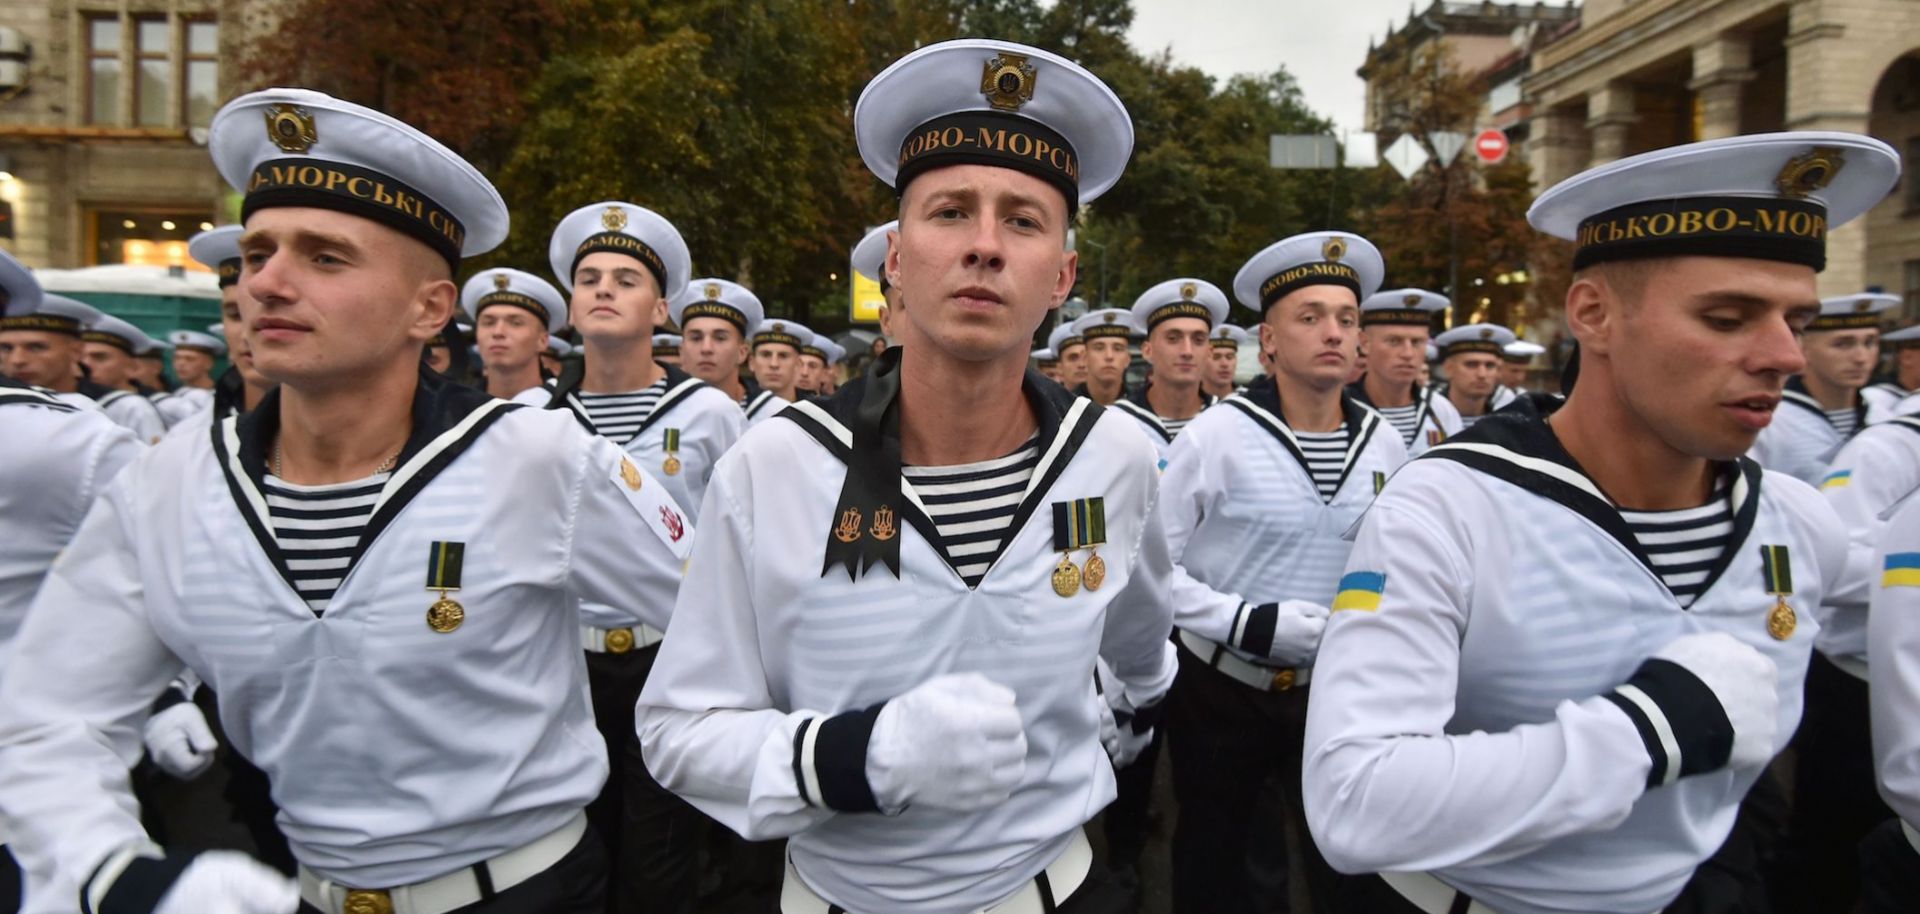 Ukrainian sailors rehearse for a military parade in Kiev during August 2017.